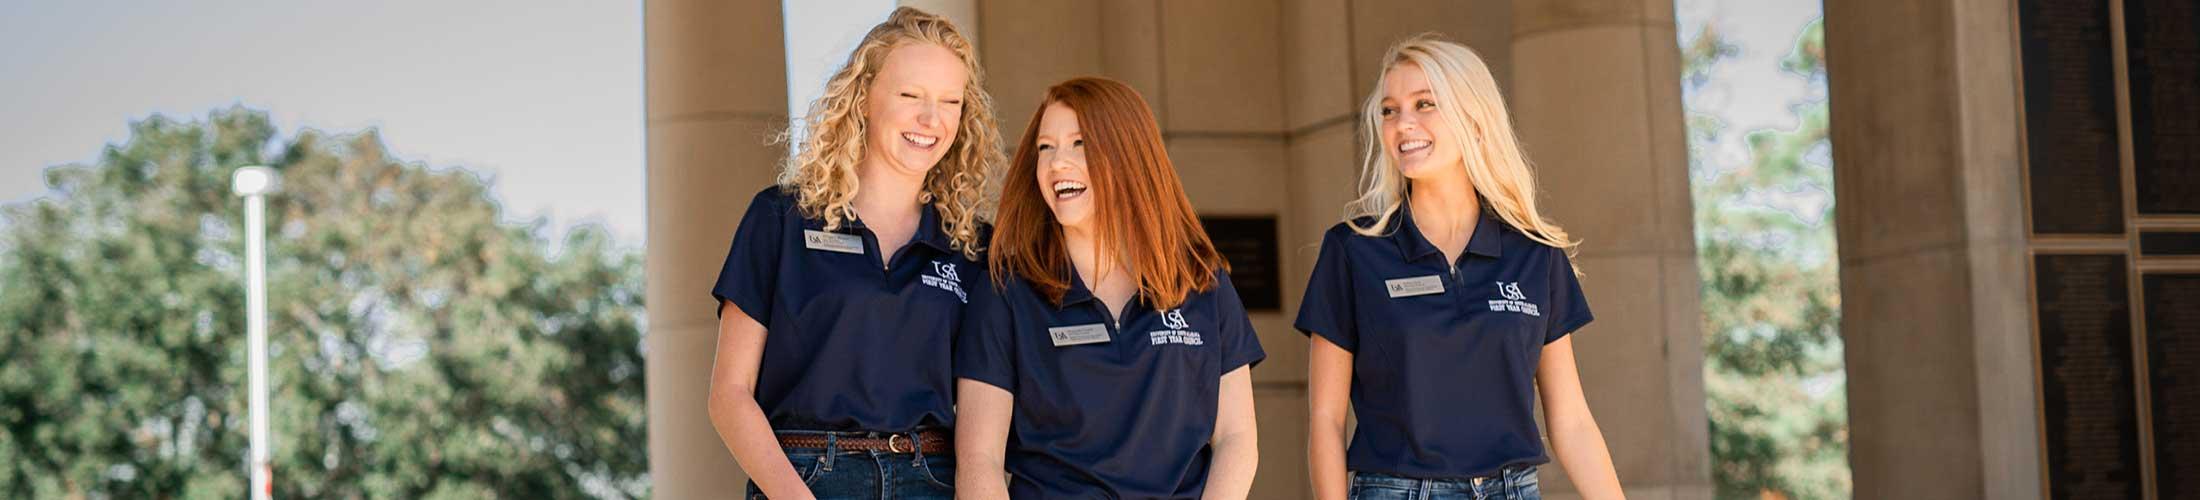 Three female FYC members smiling outside under Moulton Tower.